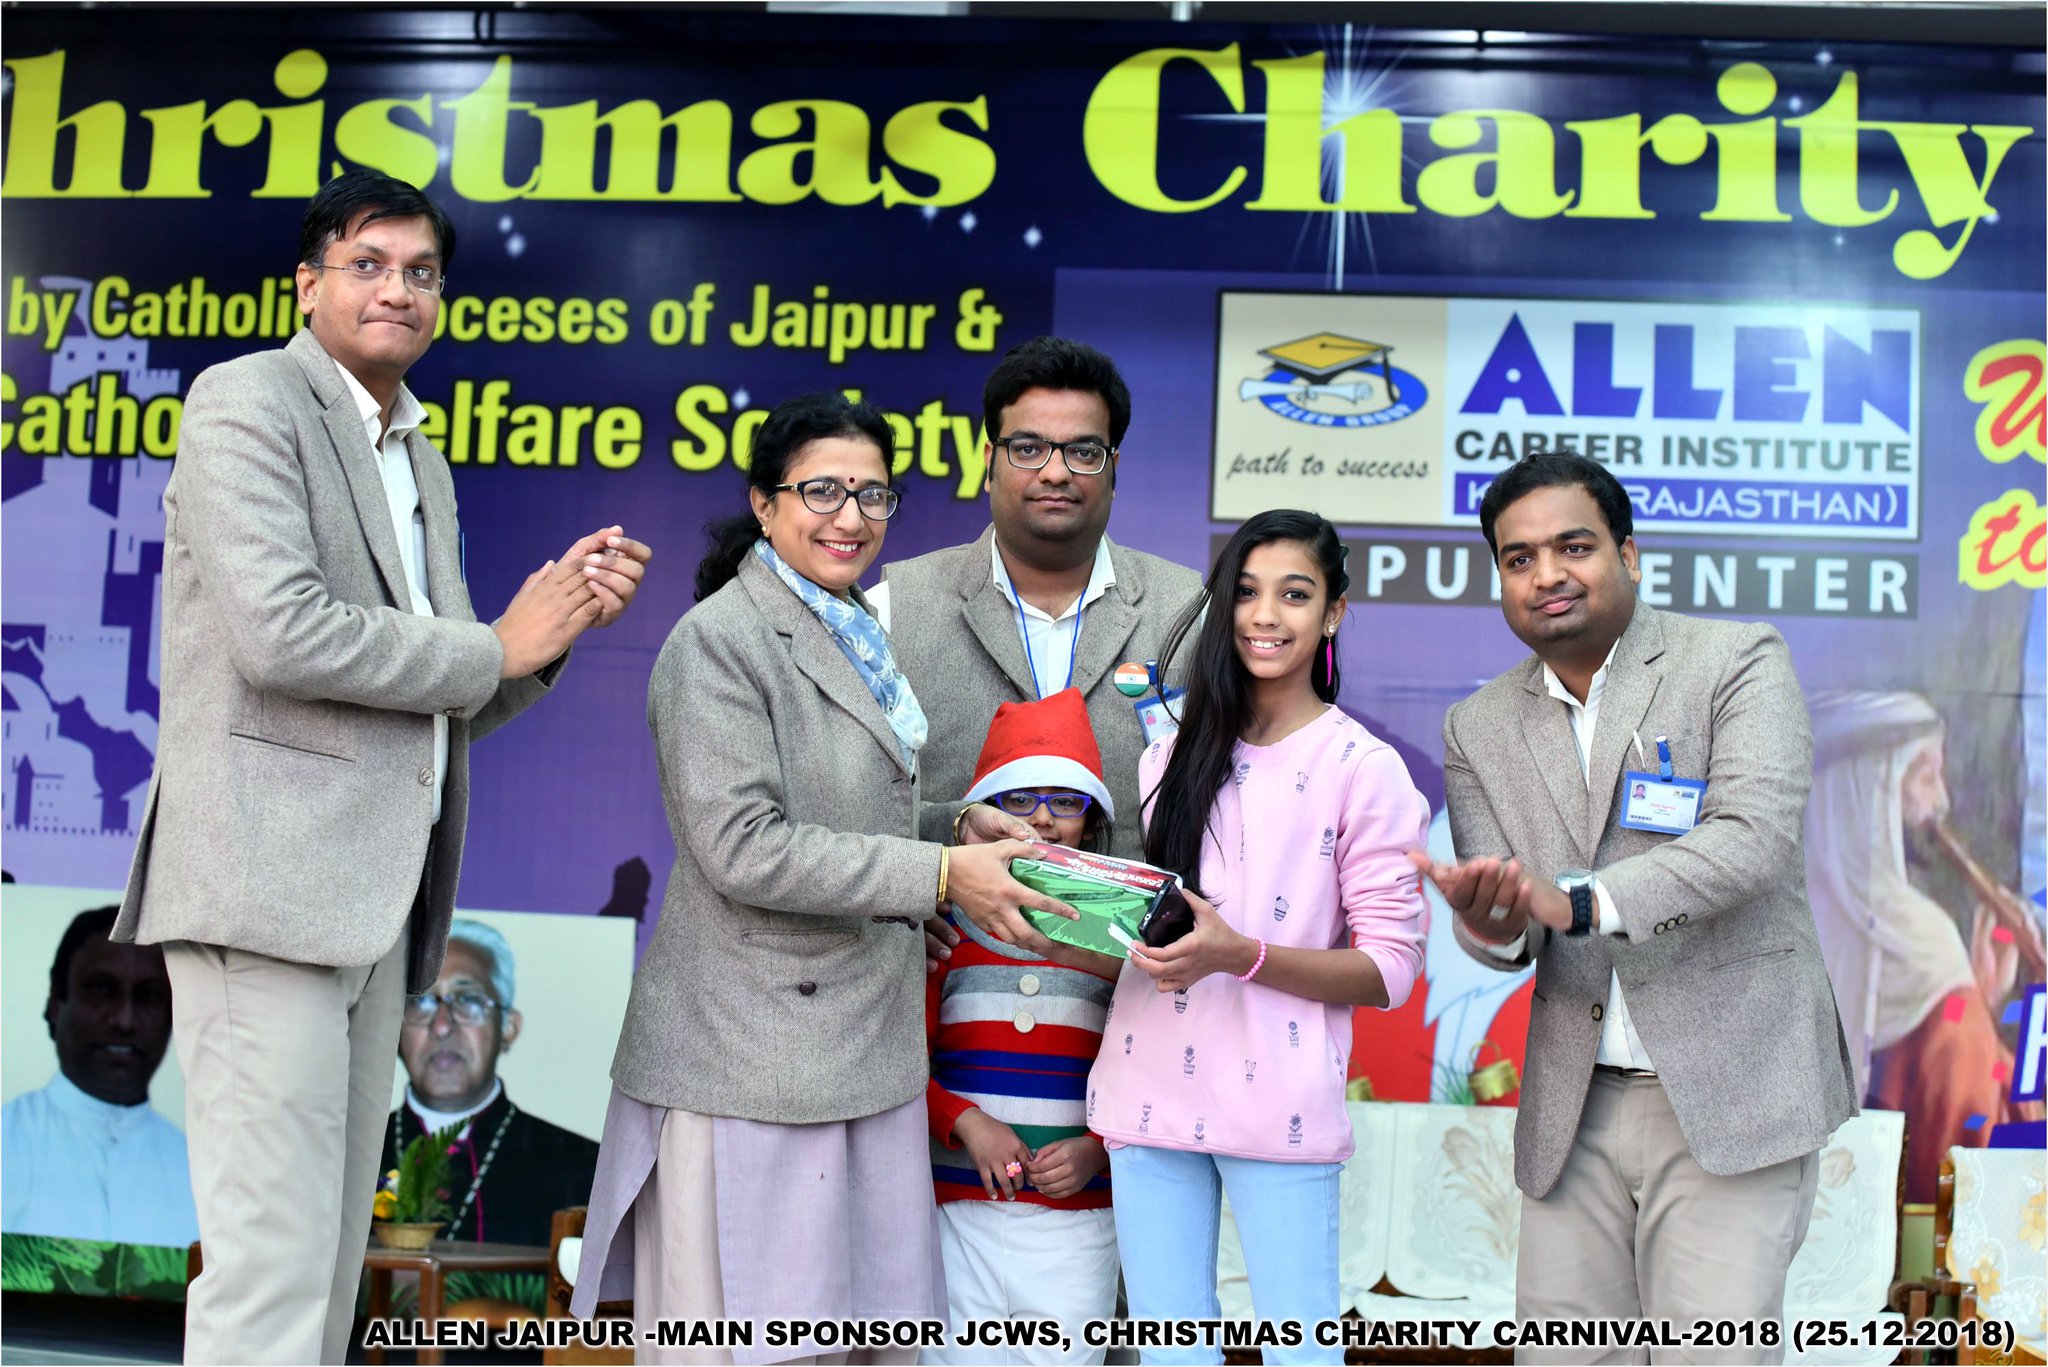 Allen Jaipur On Twitter Allen Career Institute Sponsored The Christmas Carnival Organized By Jaipur Catholic Welfare Society Jcws On 25 Dec In Which 10 000 Students With Families Of 7 Schools Had Fun In